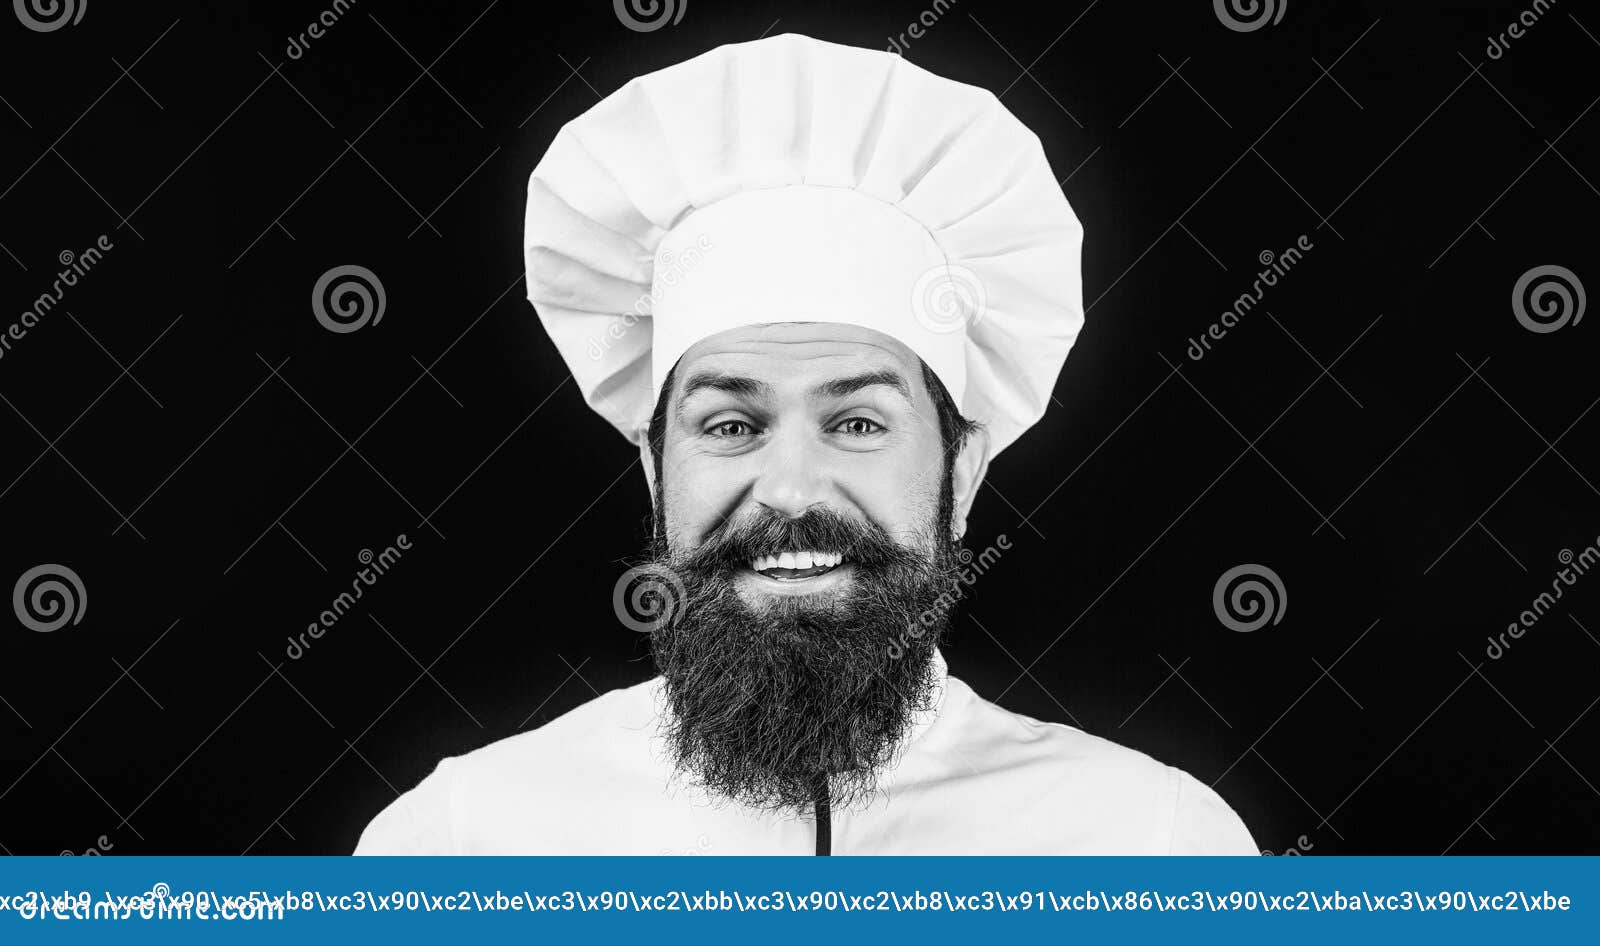 Funny Chef With Beard Cook Beard Man And Moustache Wearing Bib Apron Nappy Man Portrait Of A 